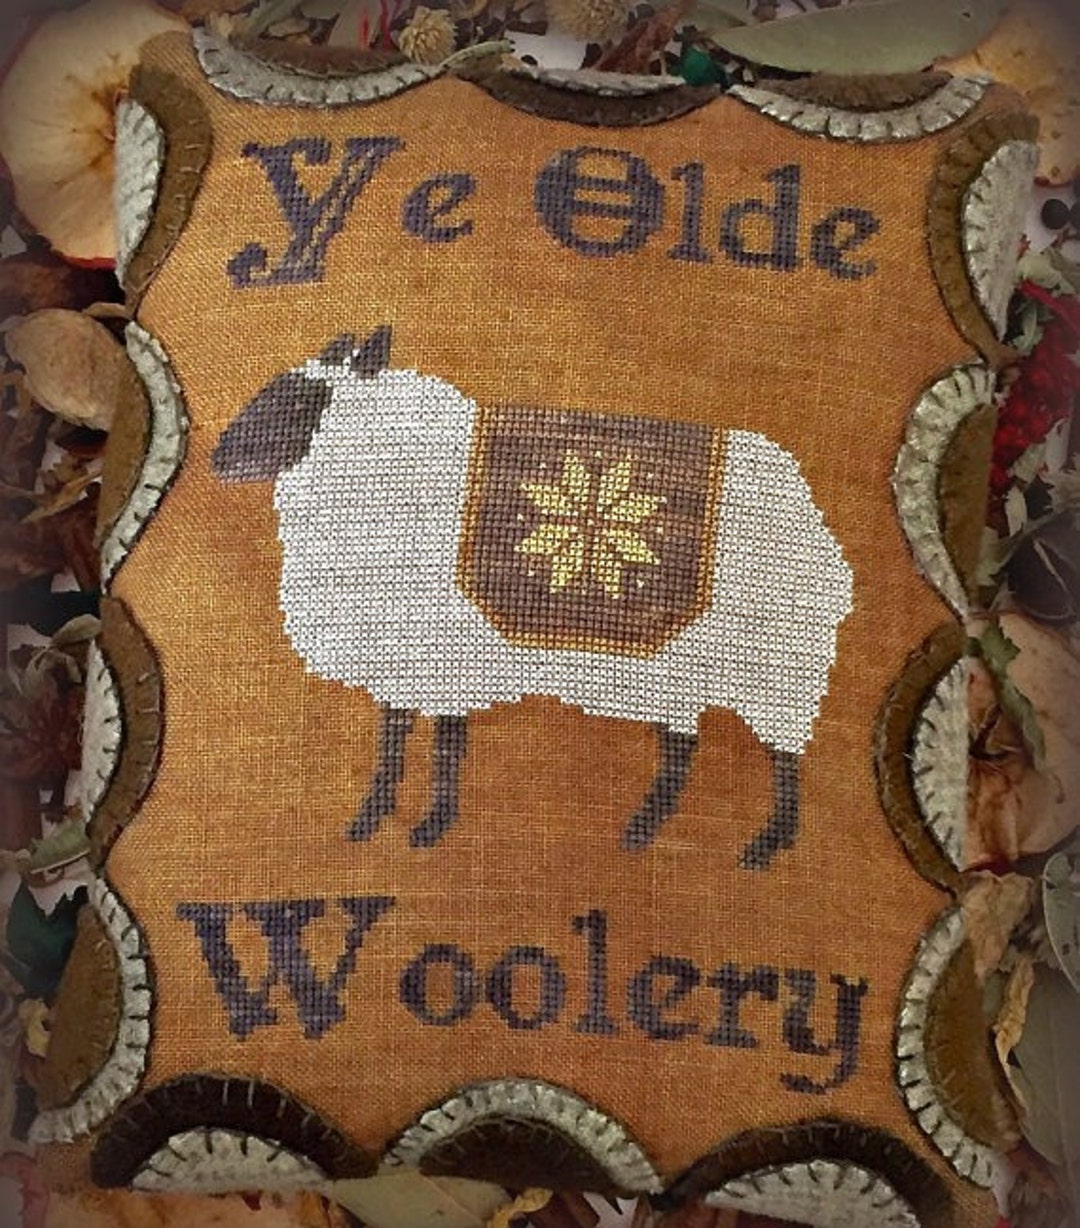 How to Get Started With Punch Needle Embroidery - The Woolery